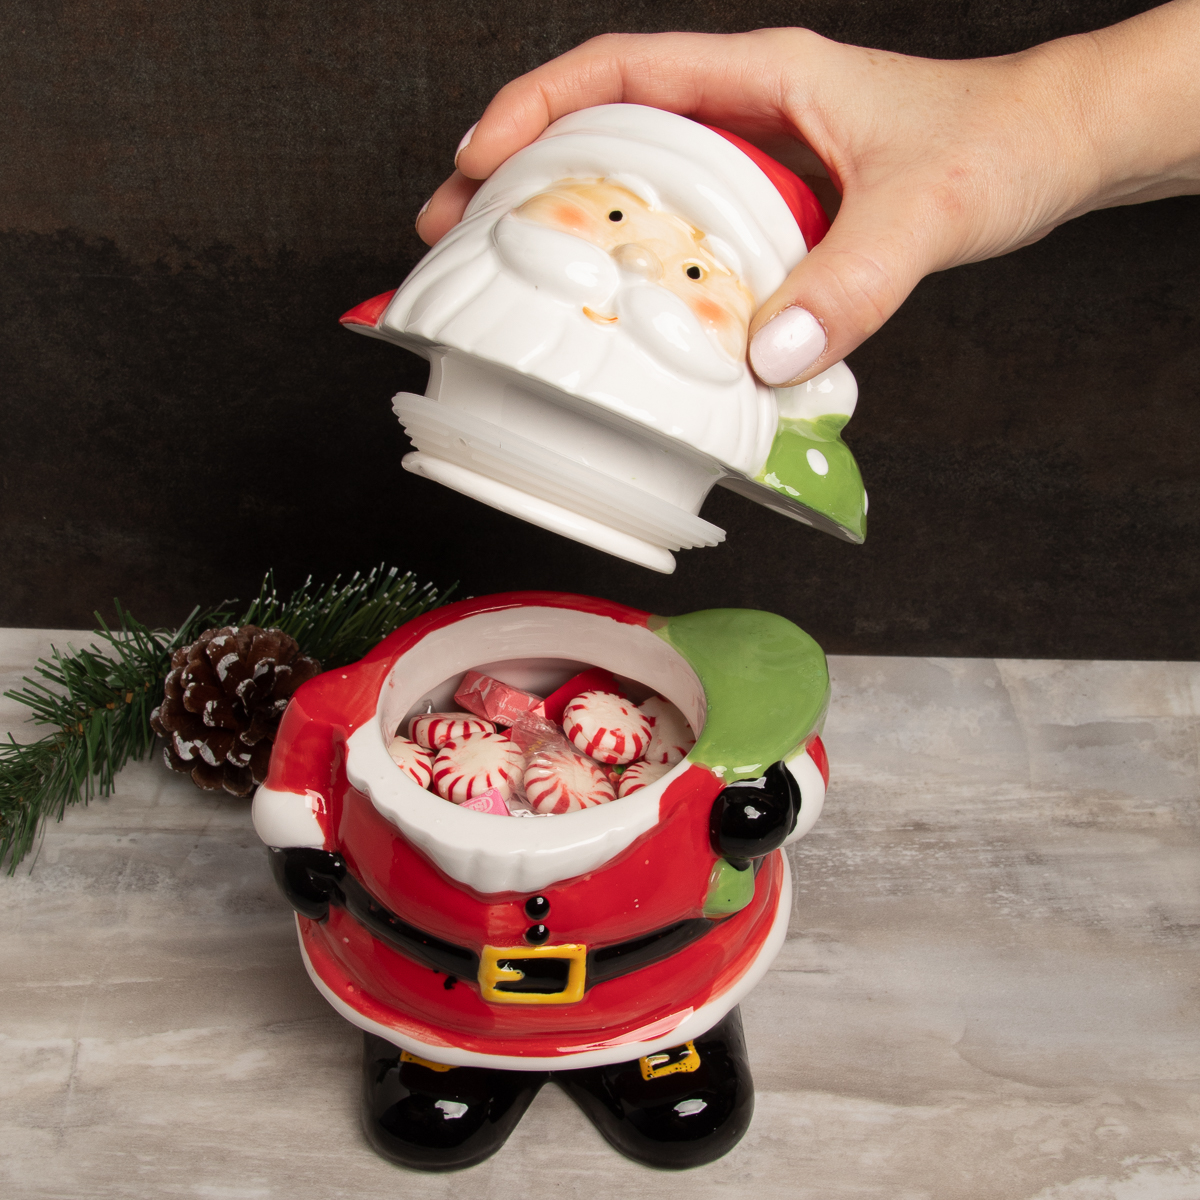 Gibson Home Santa Claus 7.5" Ceramic Holiday Season Treat Jar with Lid Bag Silicone - image 5 of 7